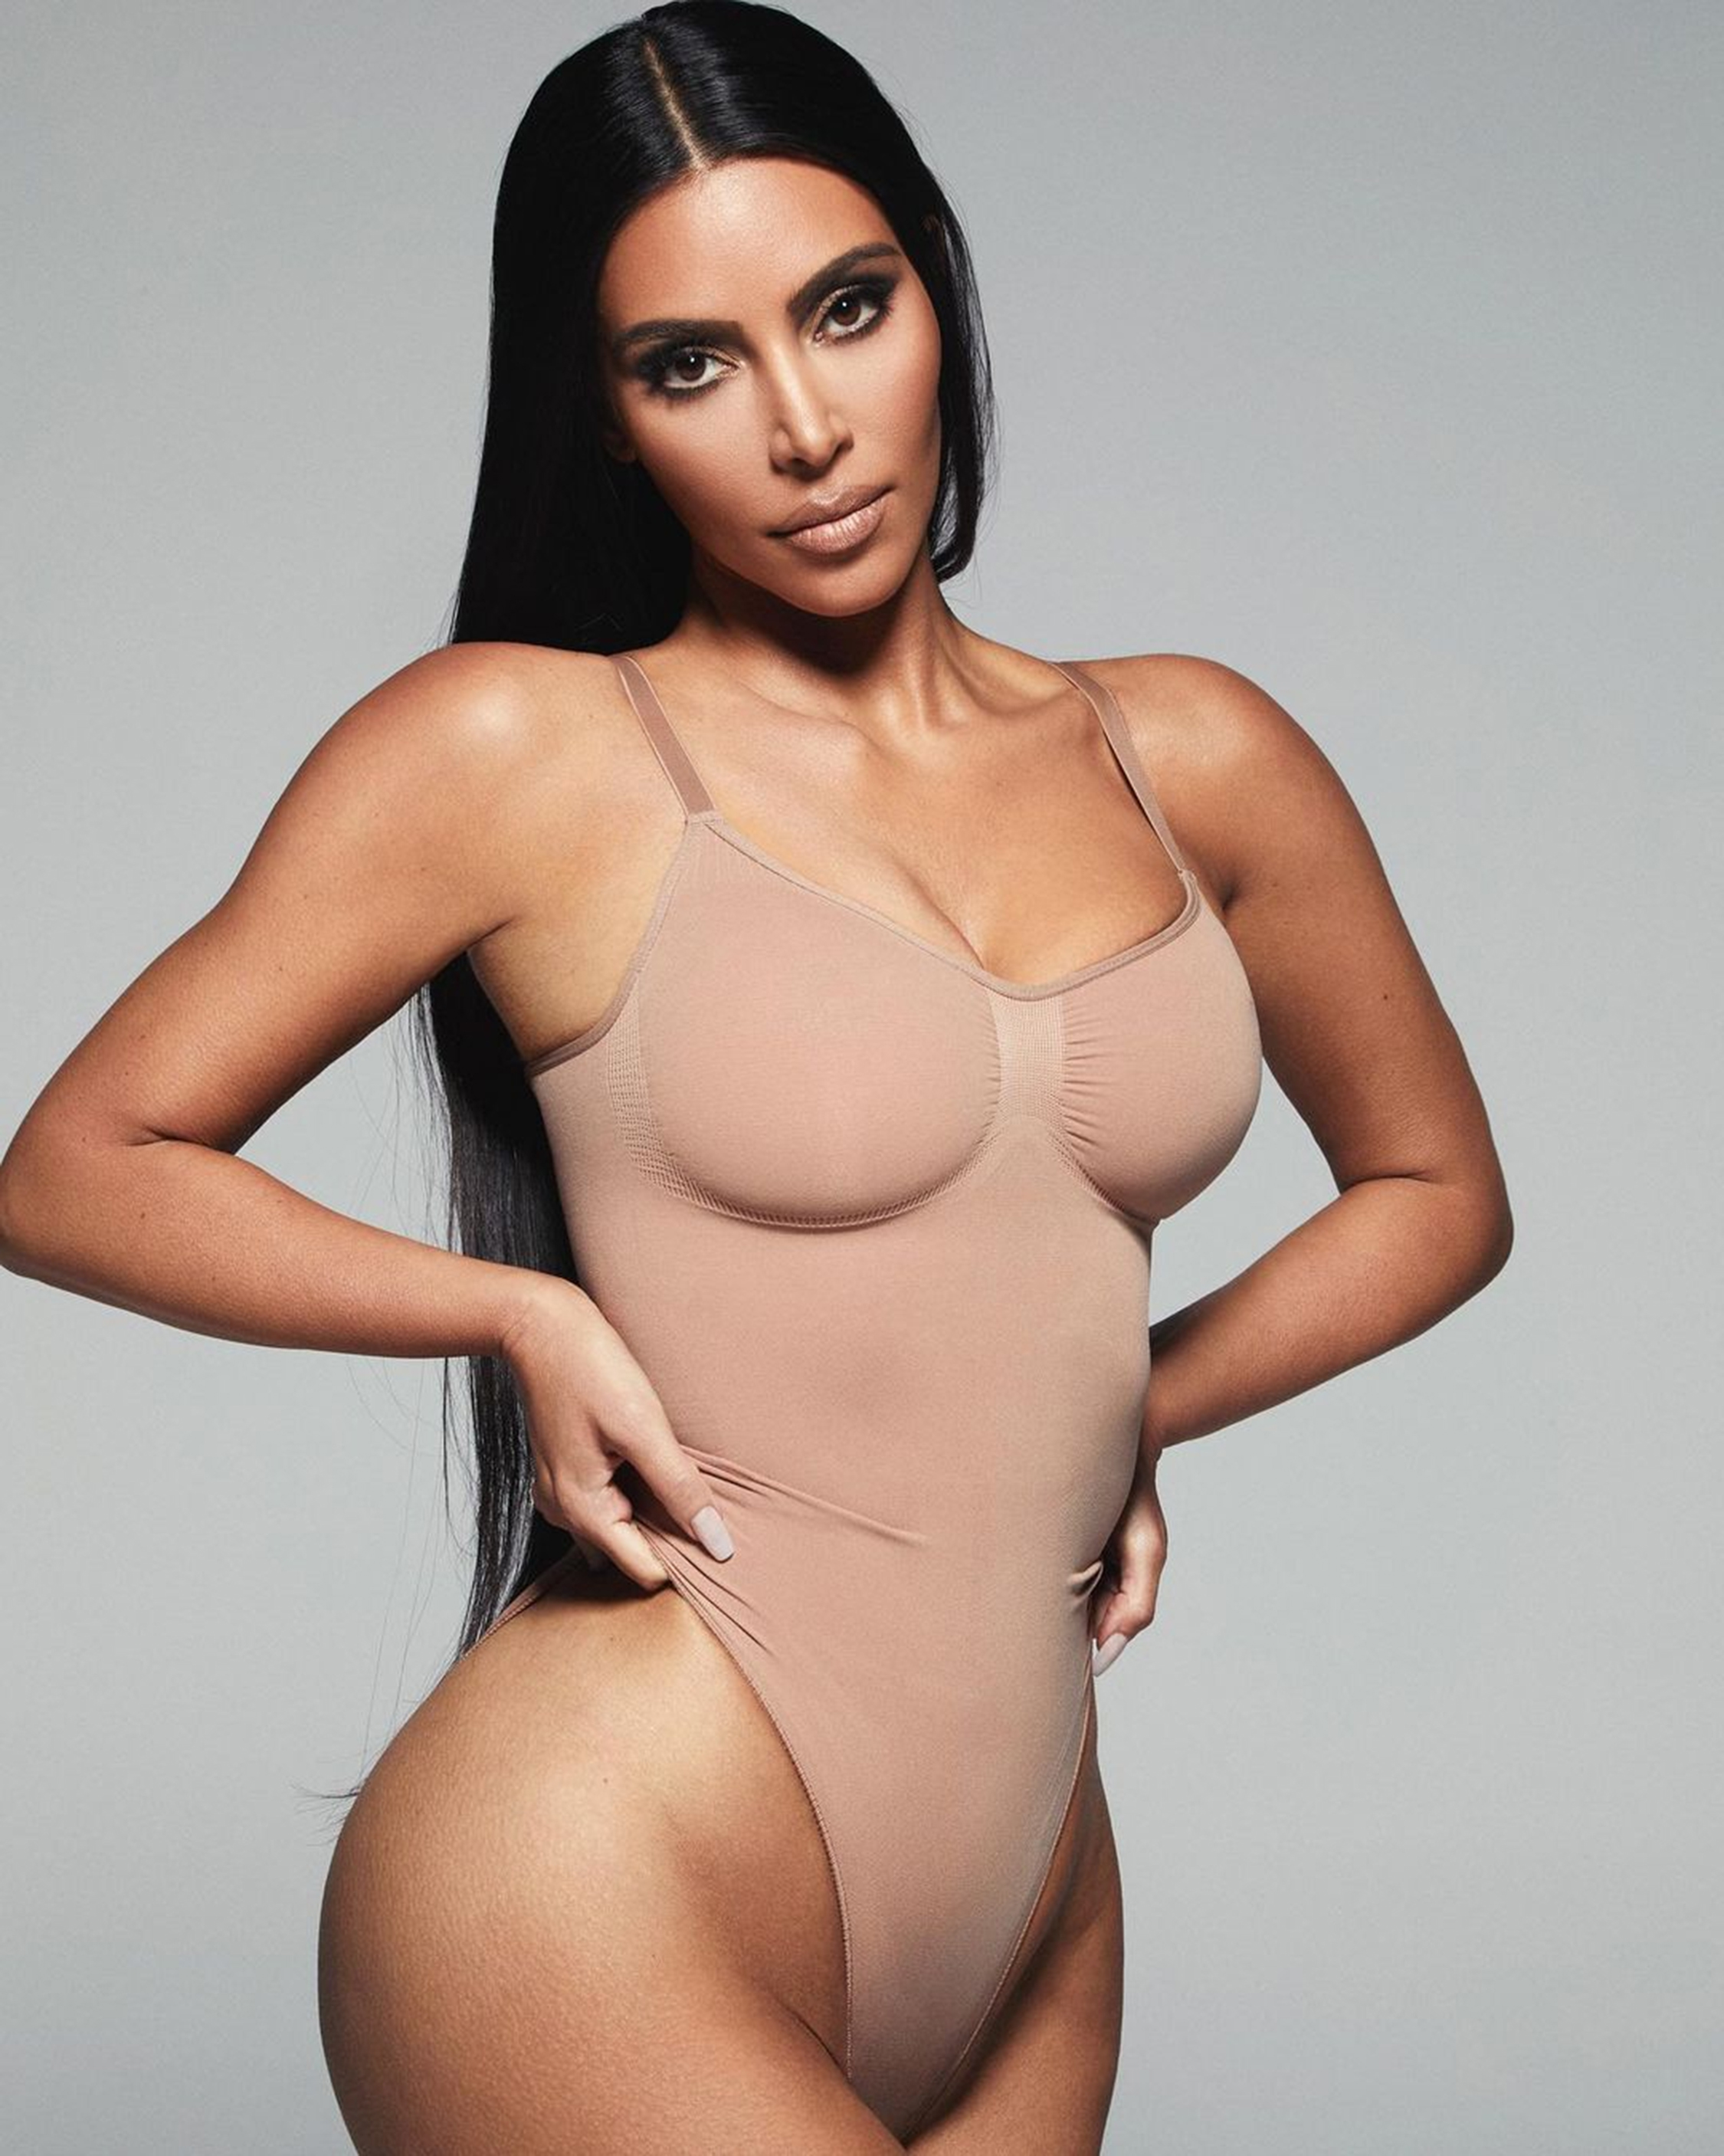 Kim launched the brand in 2019